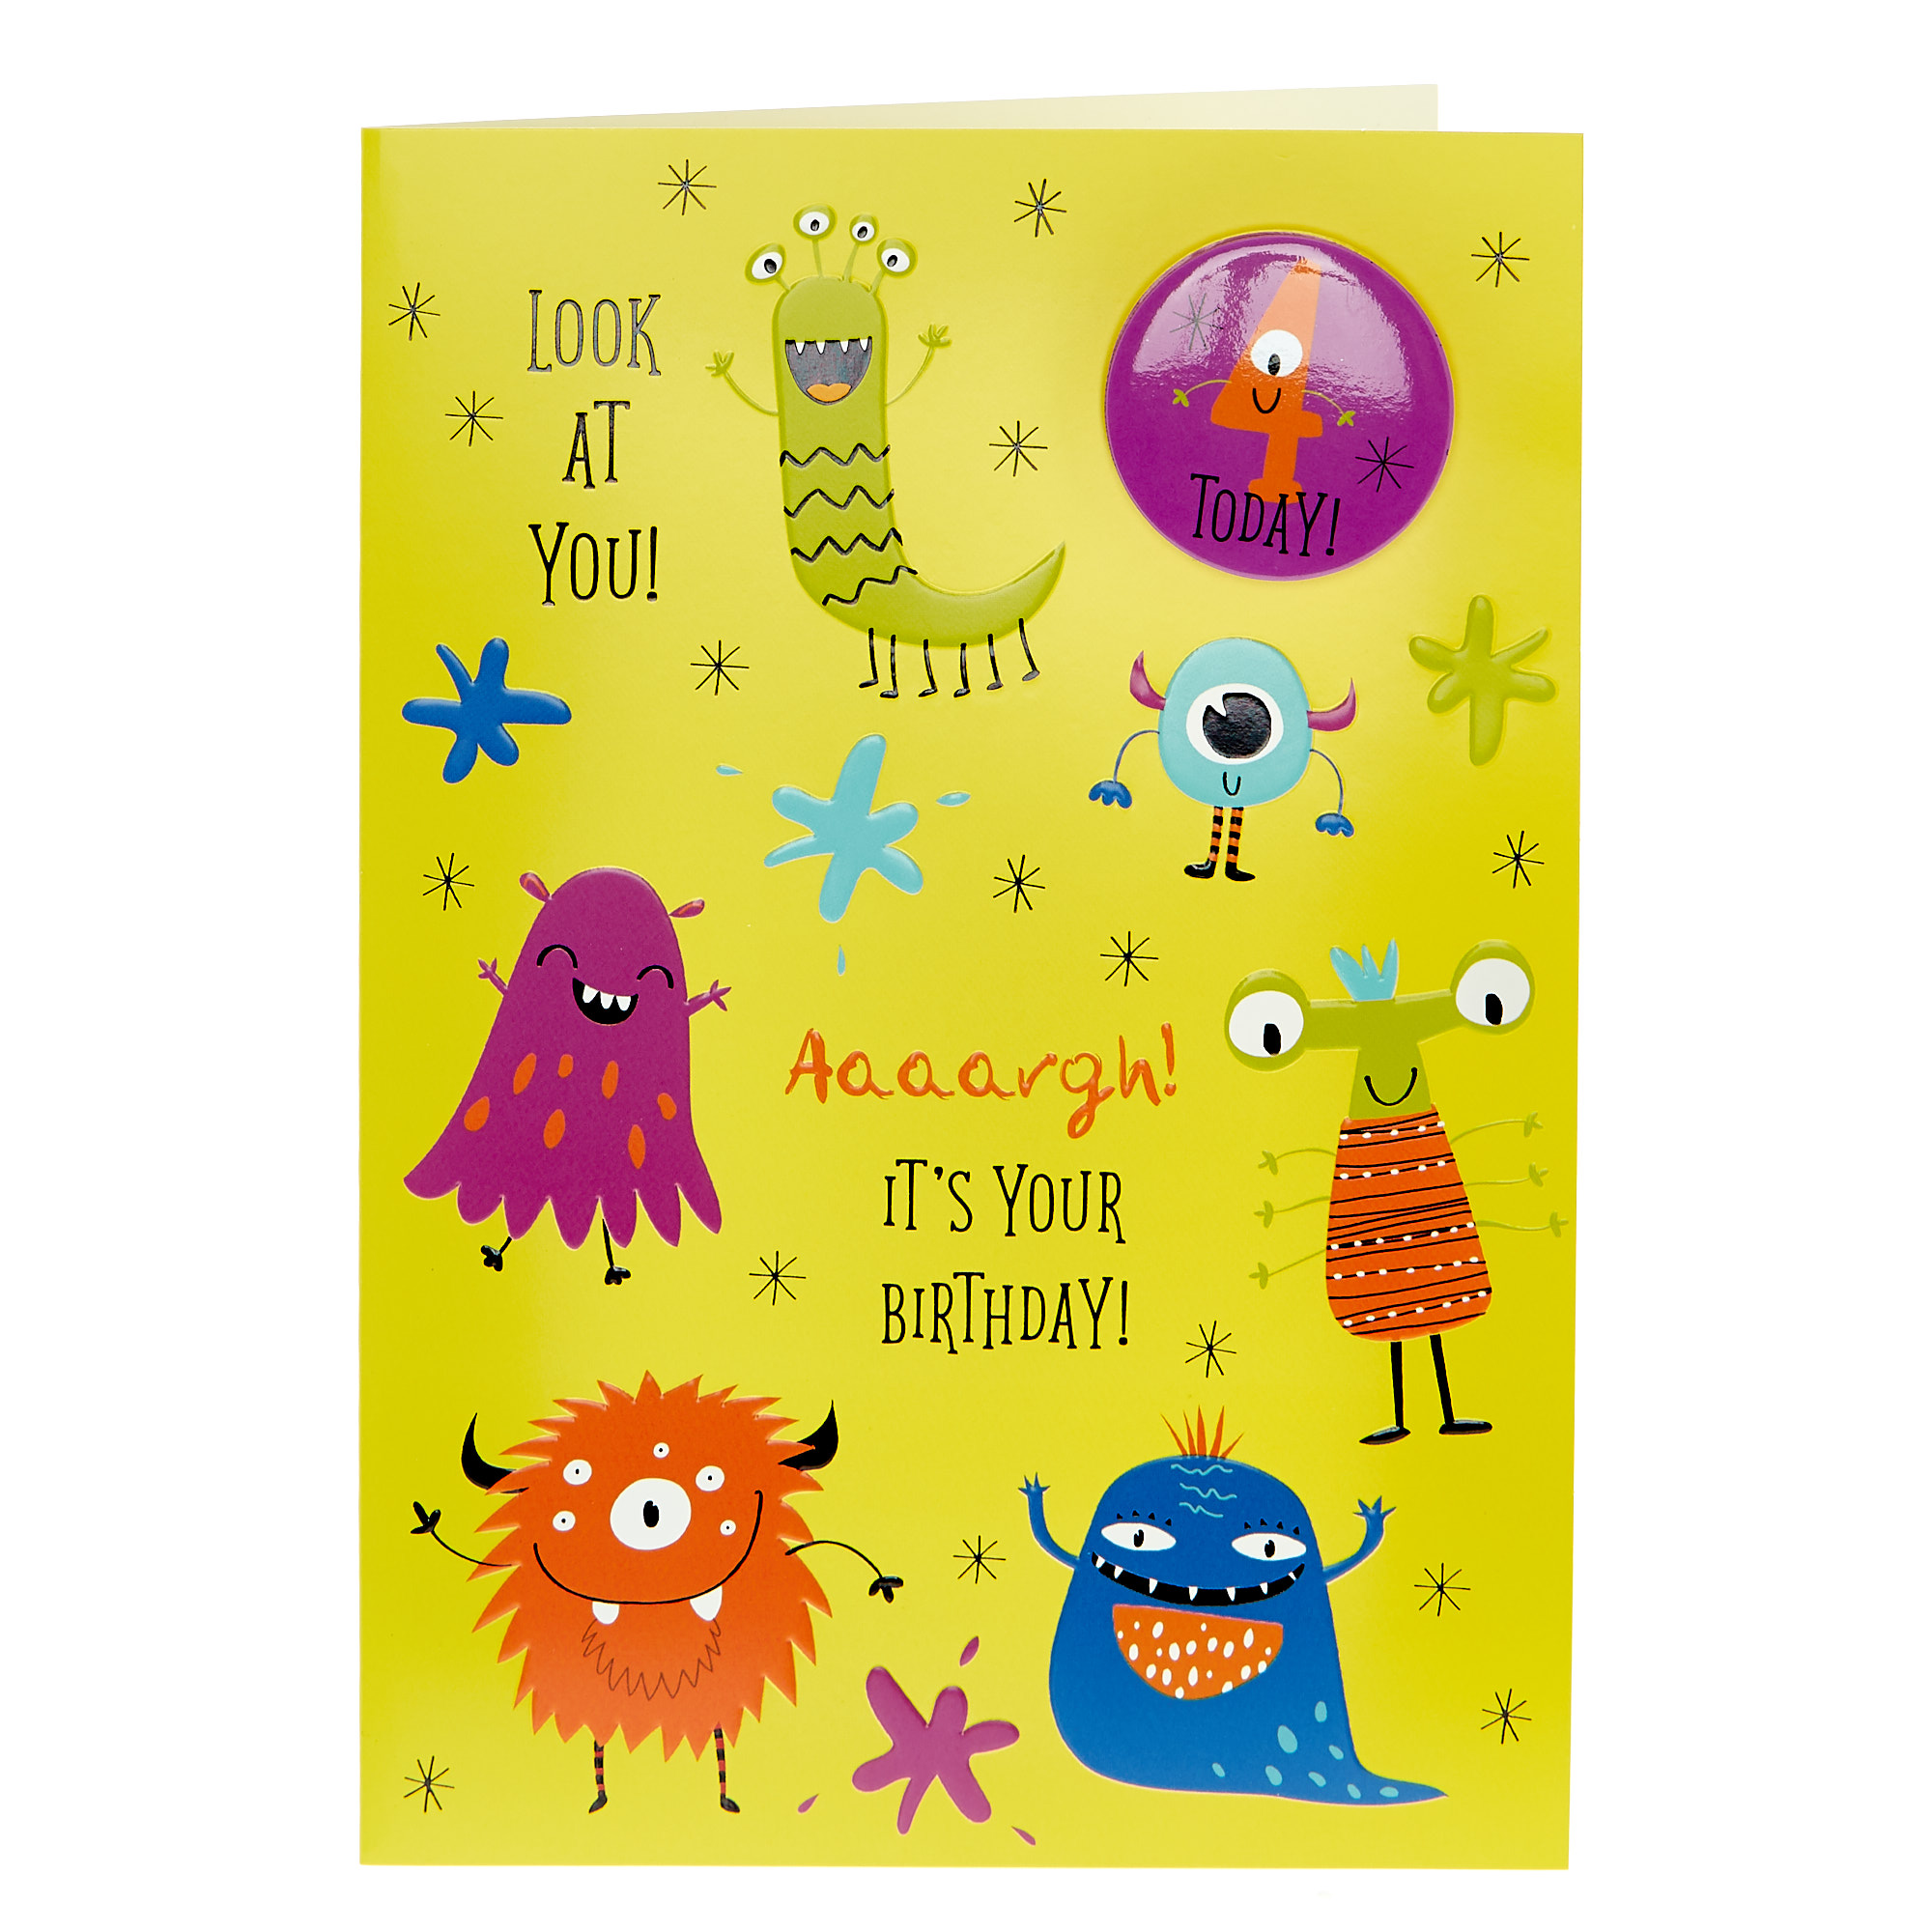 4th Birthday Card - Look at you! (With Badge)